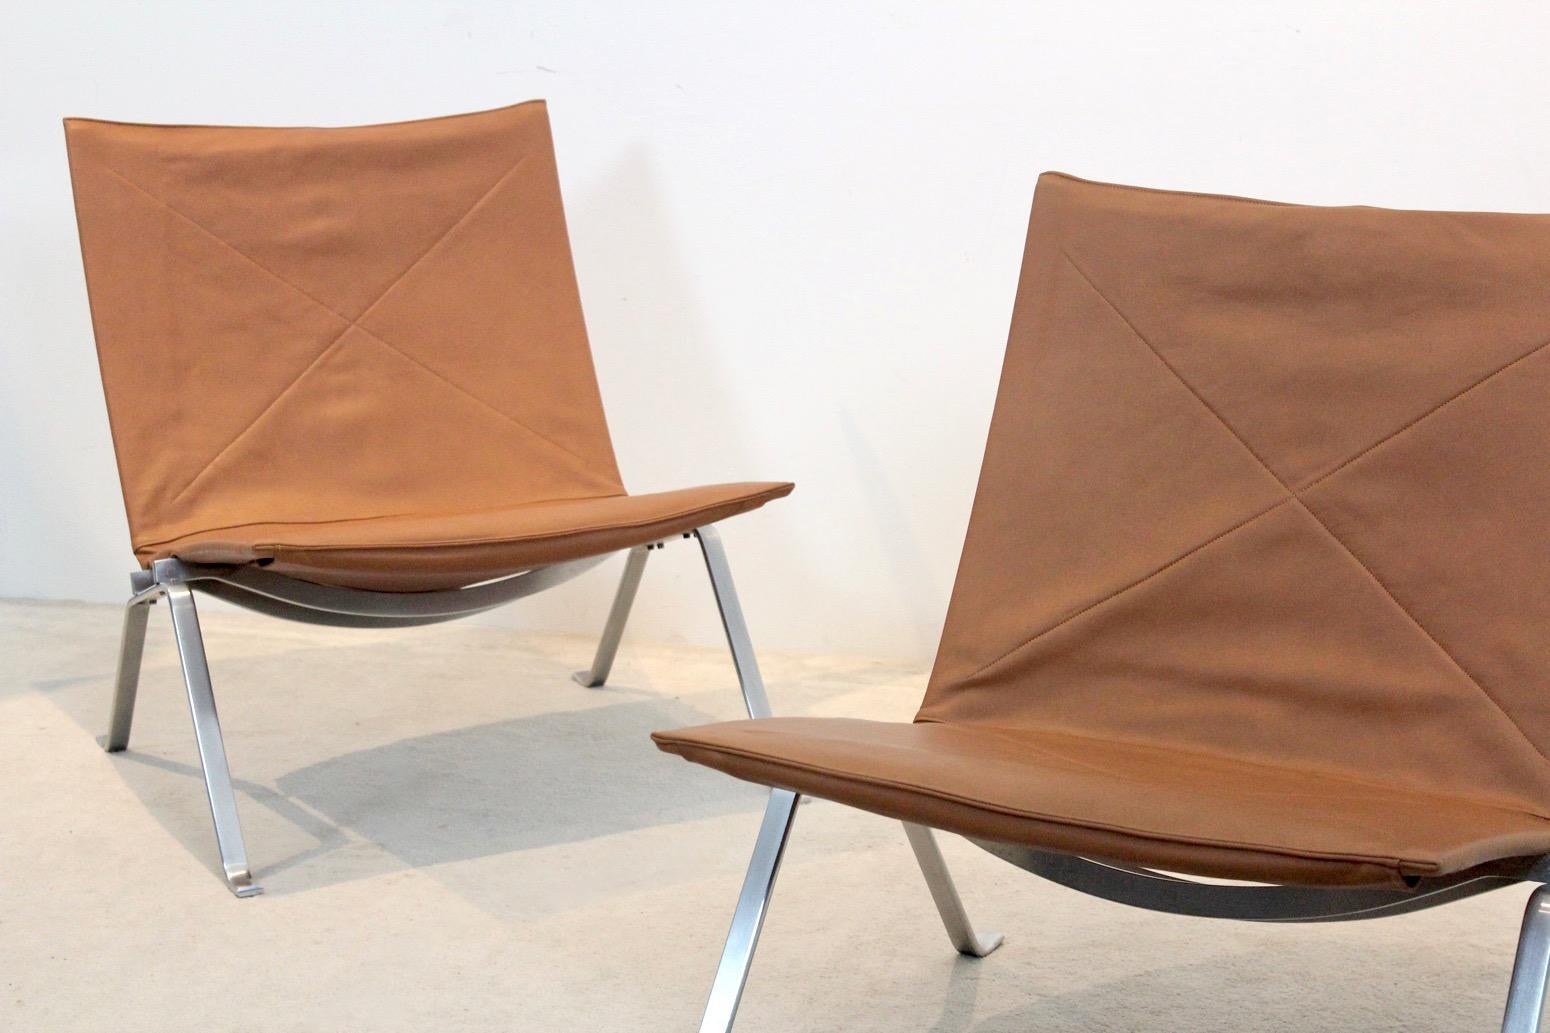 Stainless Steel Exquisite Cognac Leather PK22 chairs by Poul Kjærholm for E. Kold Christensen For Sale